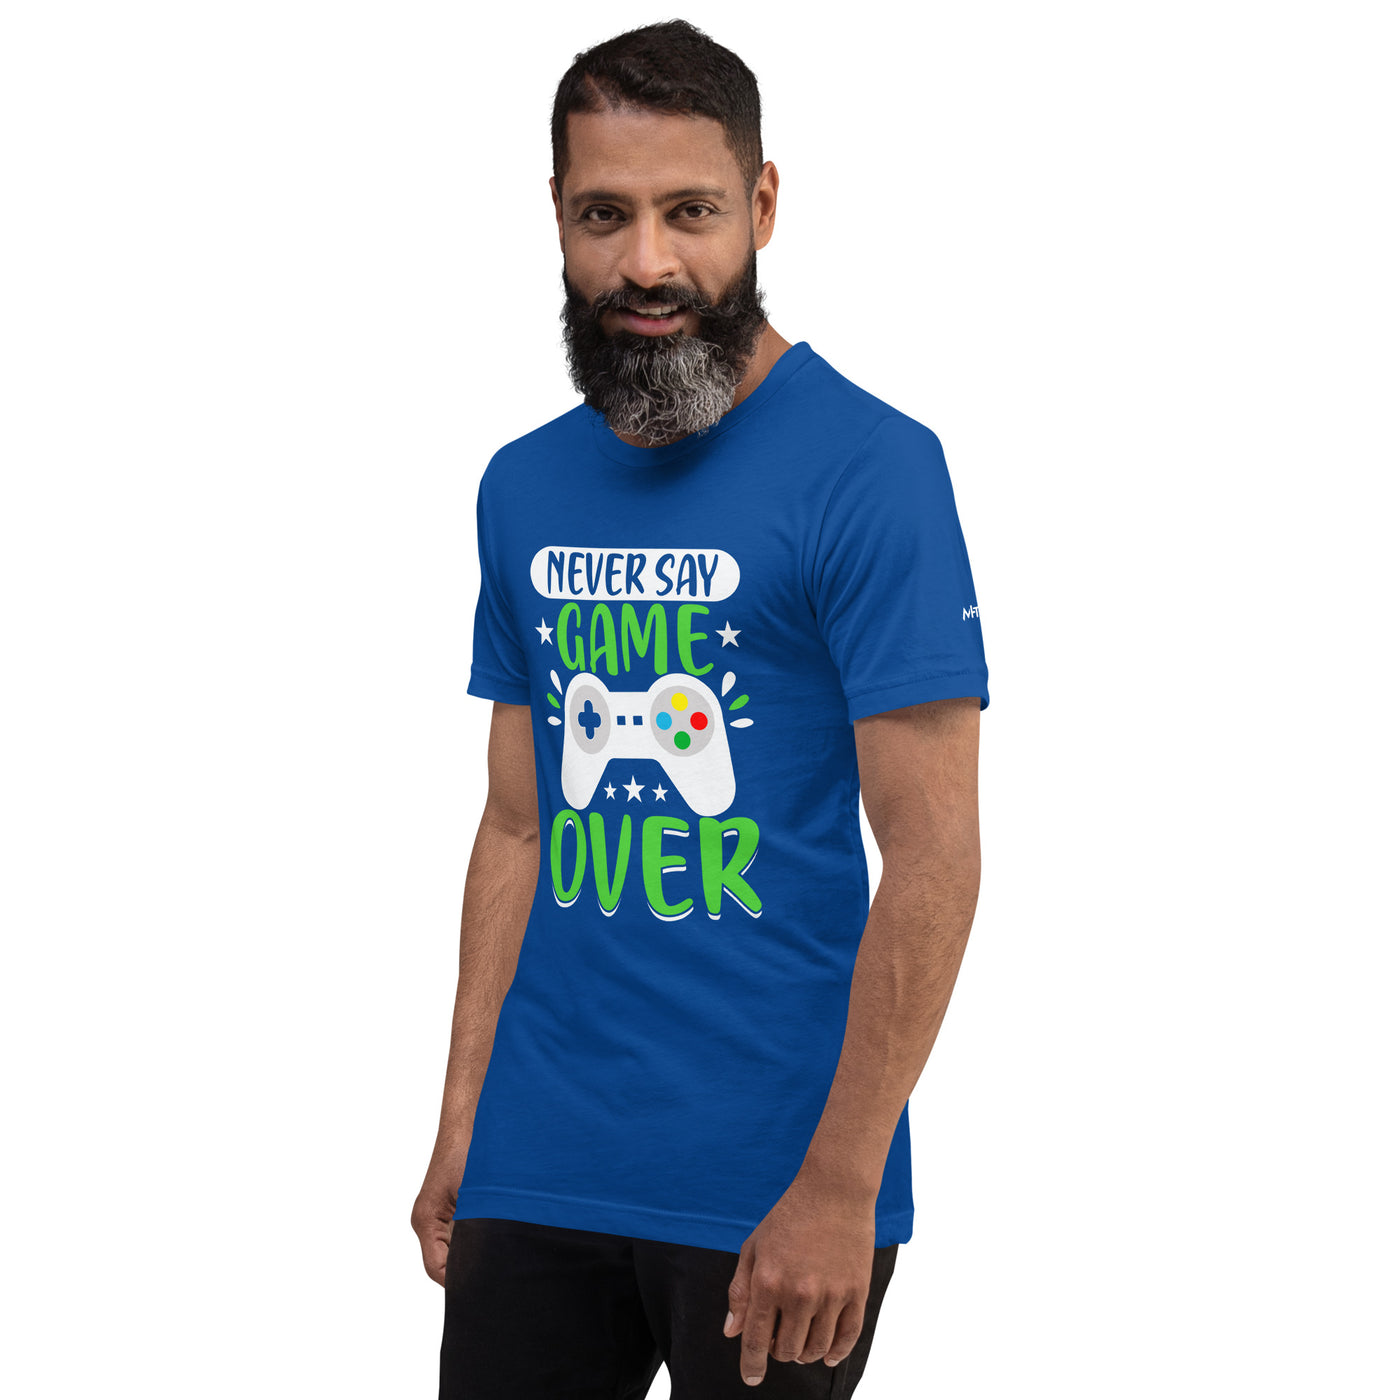 Never say Gameover Unisex t-shirt